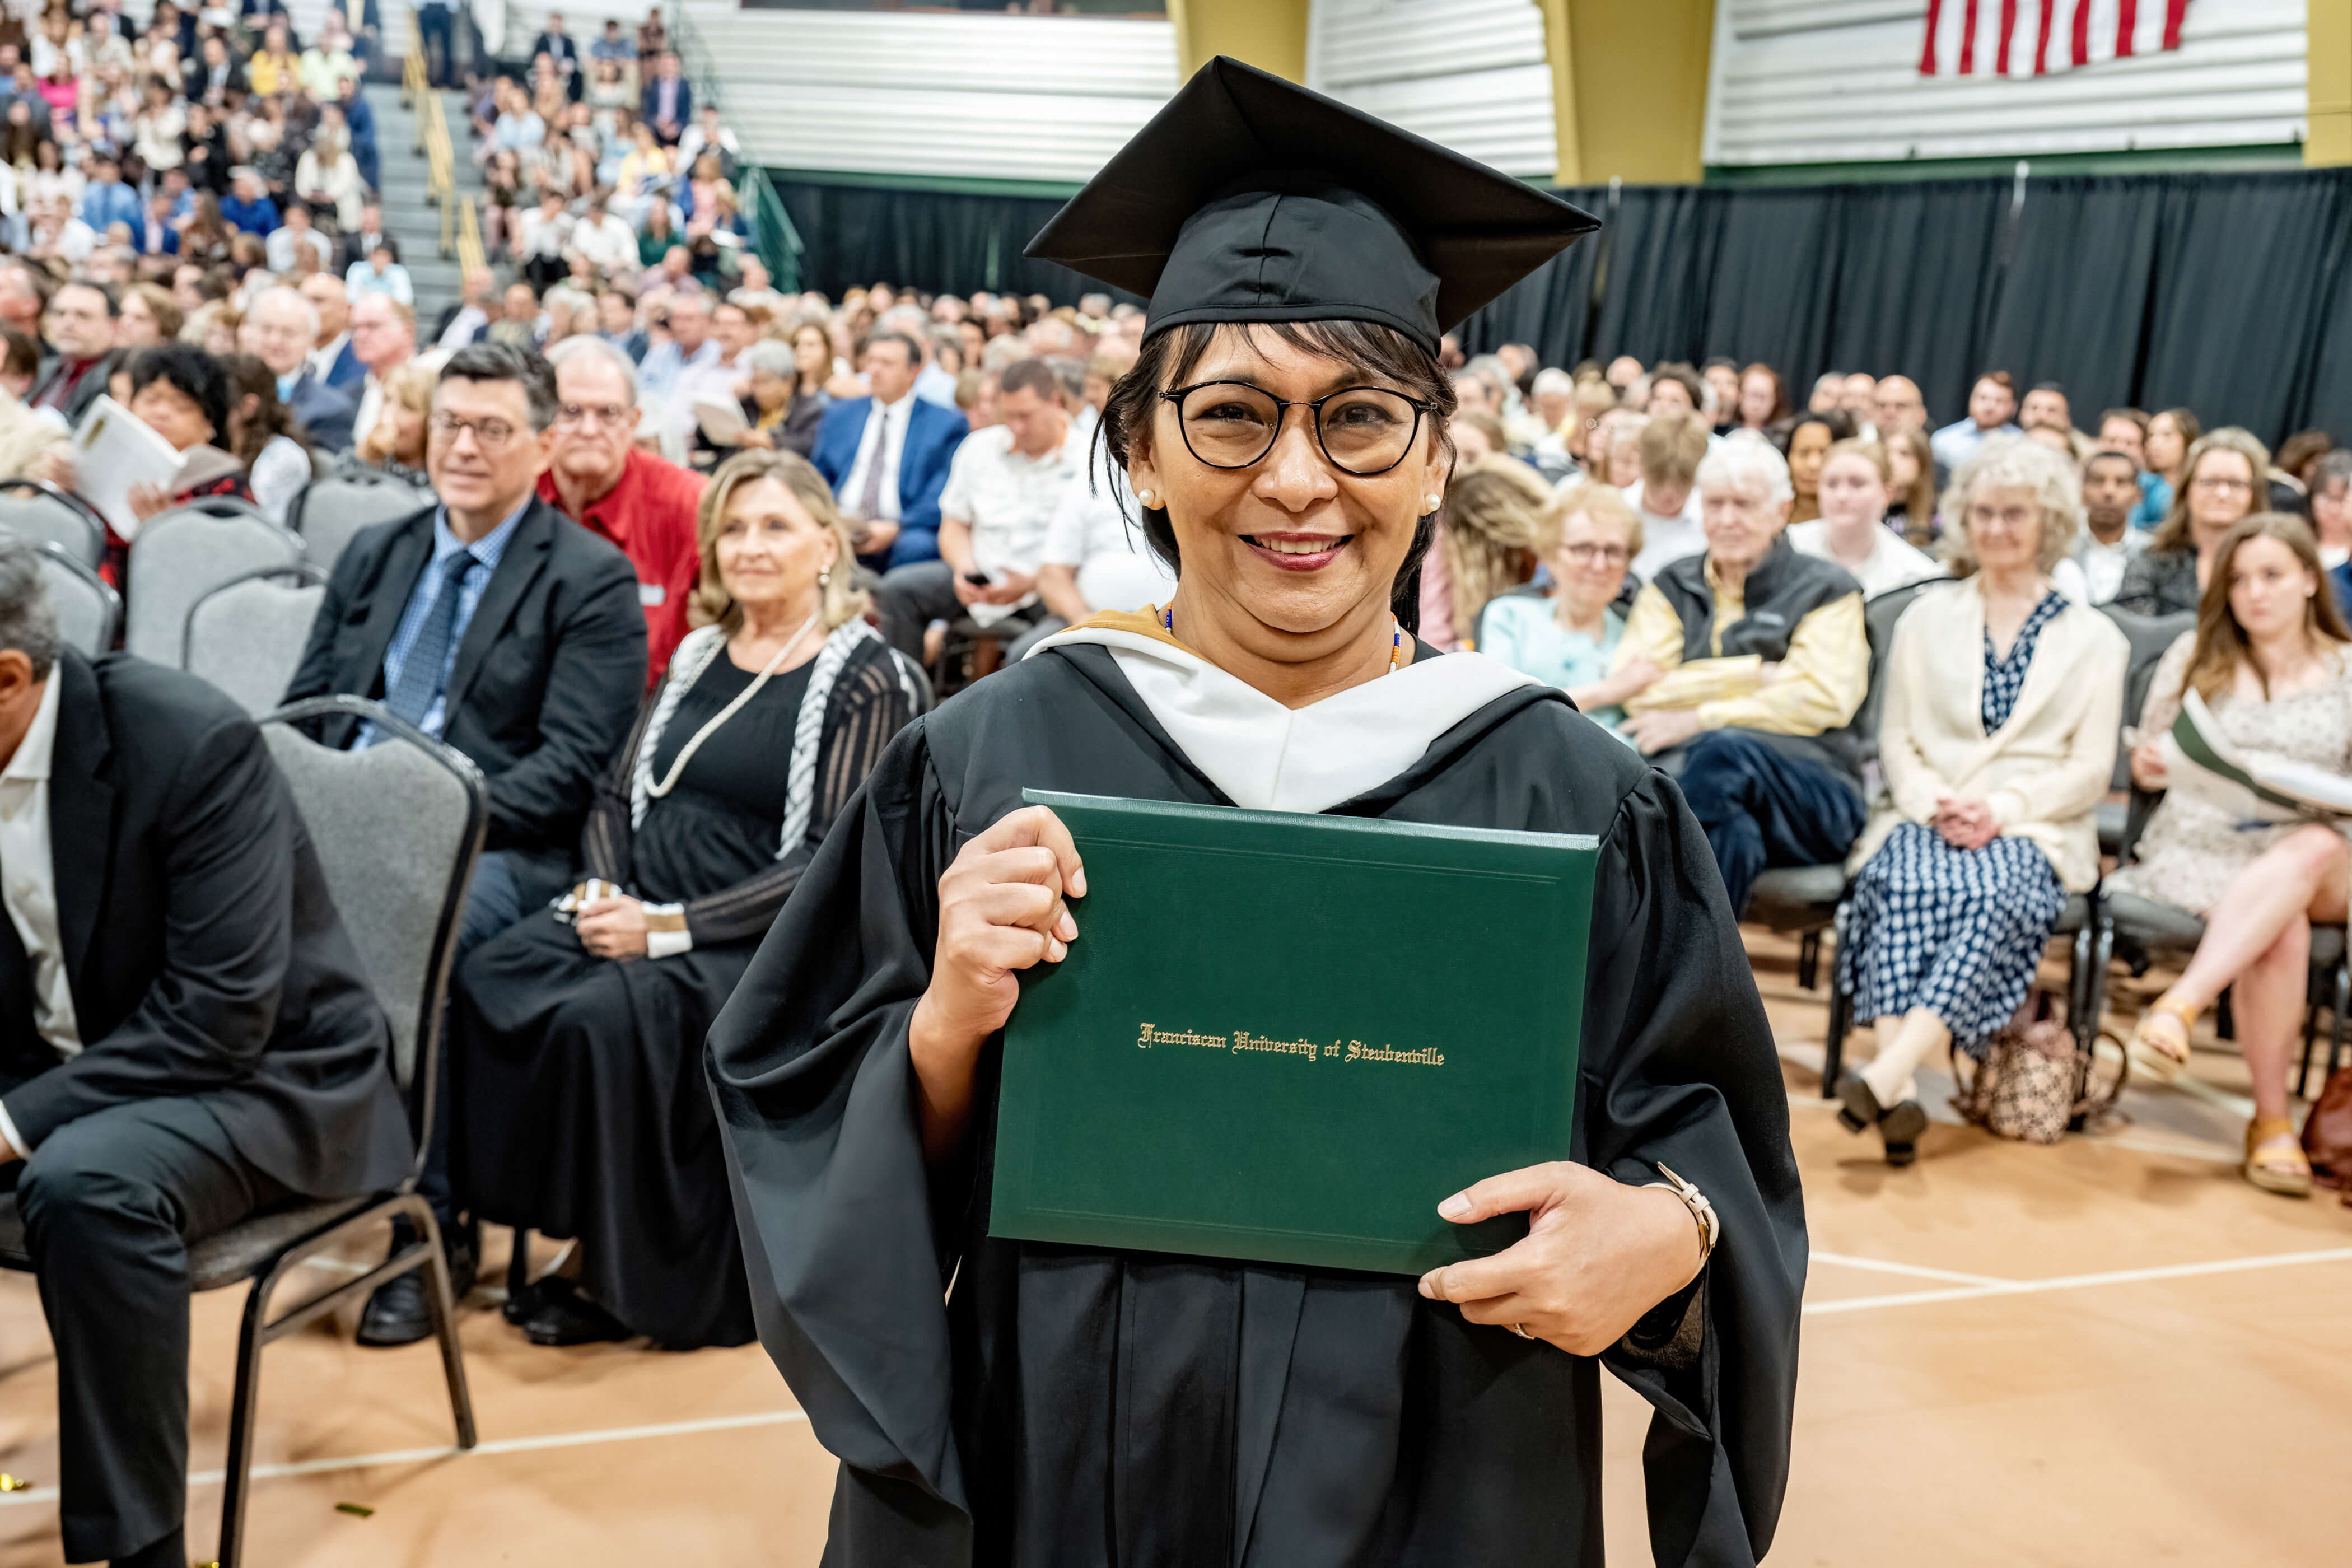 Online graduate Ma Celeste de Leon Magsino ’23 came from the Philippines to receive her MA in theology and Christian ministry in person. 